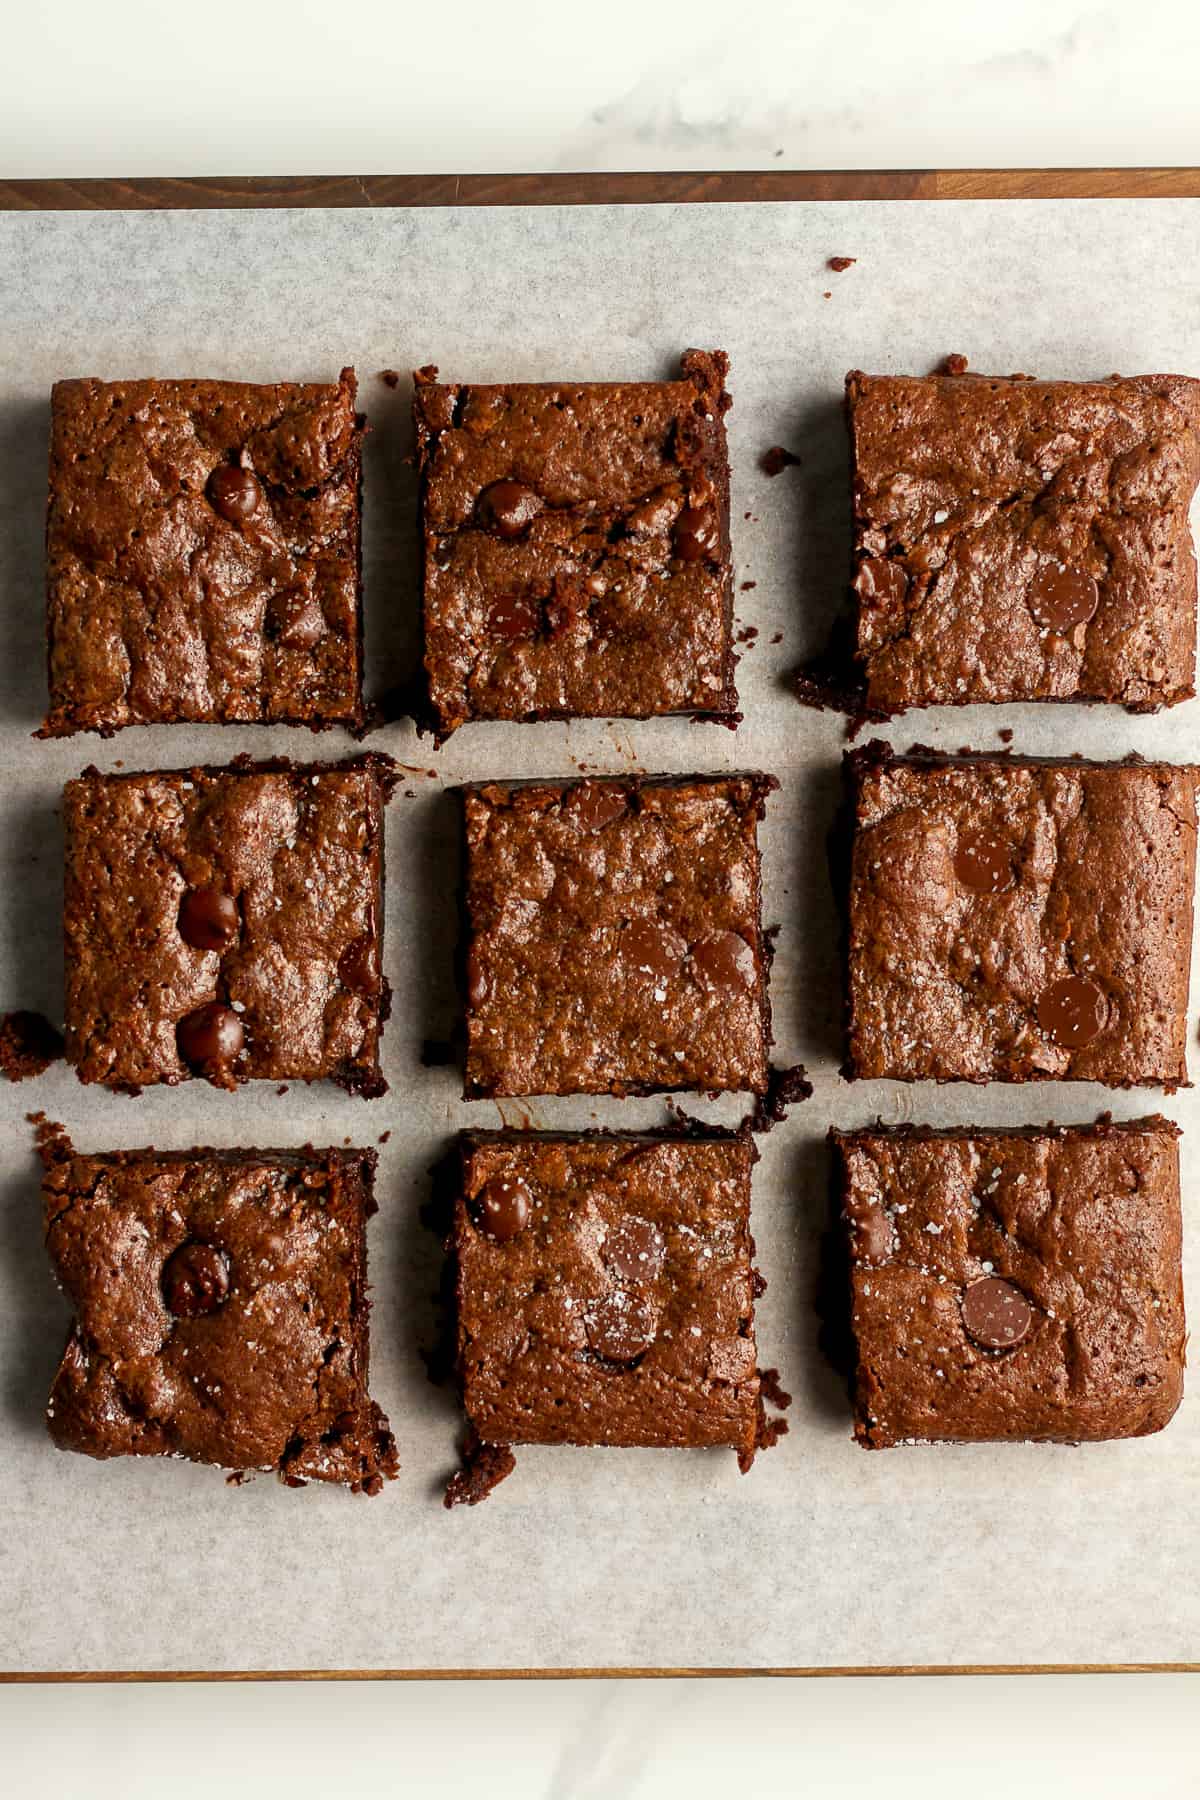 The brownies cut into nine pieces.